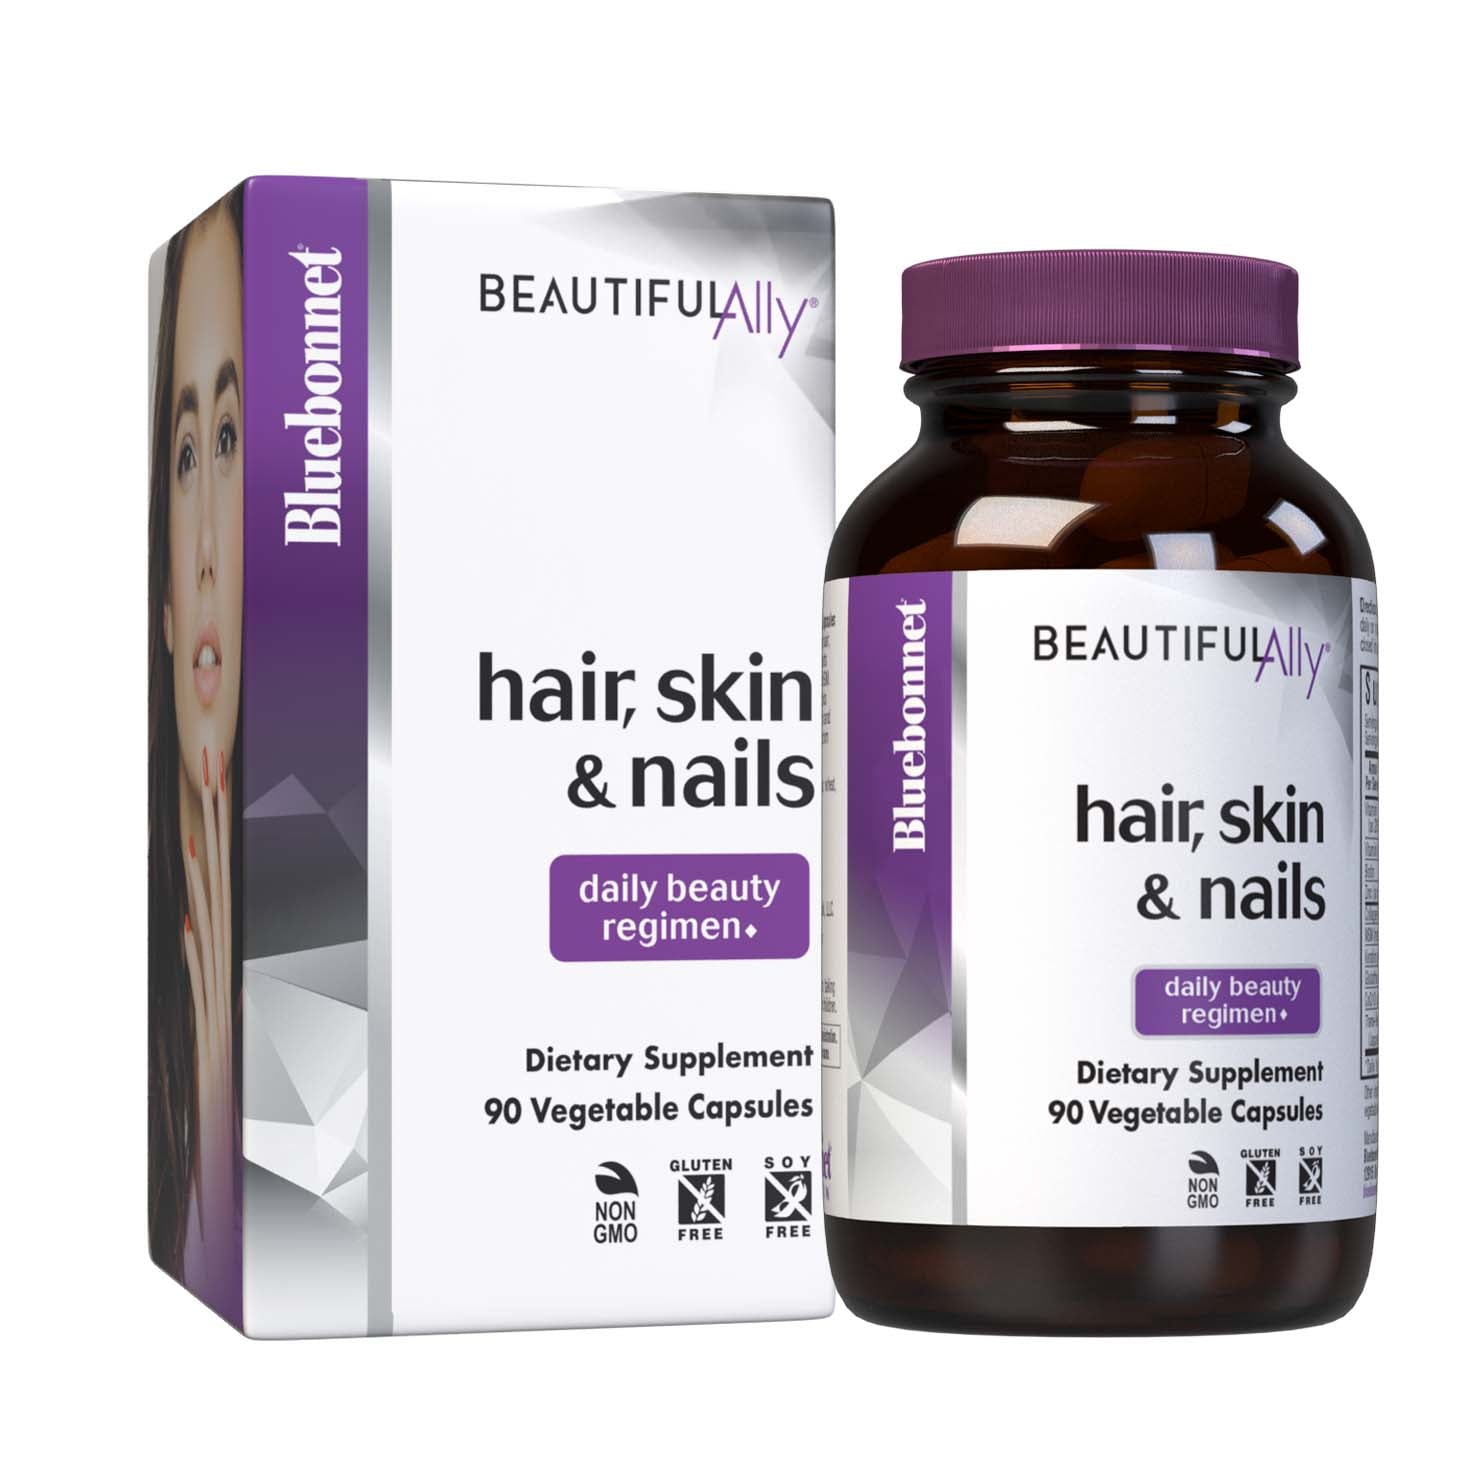 Bluebonnet’s Beautiful Ally Hair Skin & Nails 90 Vegetable Capsules are formulated to help protect, maintain and nourish hair, skin and nails daily with vitamins, minerals and other ingredients like L-glutathione, type I & III collagen peptides, keratin, and MSM. These nutrients provide the body with the building blocks necessary to help improve the strength and appearance of hair and nails while supporting skin moisture, elasticity, and radiance from the inside out. Bottle and box. #size_90 count